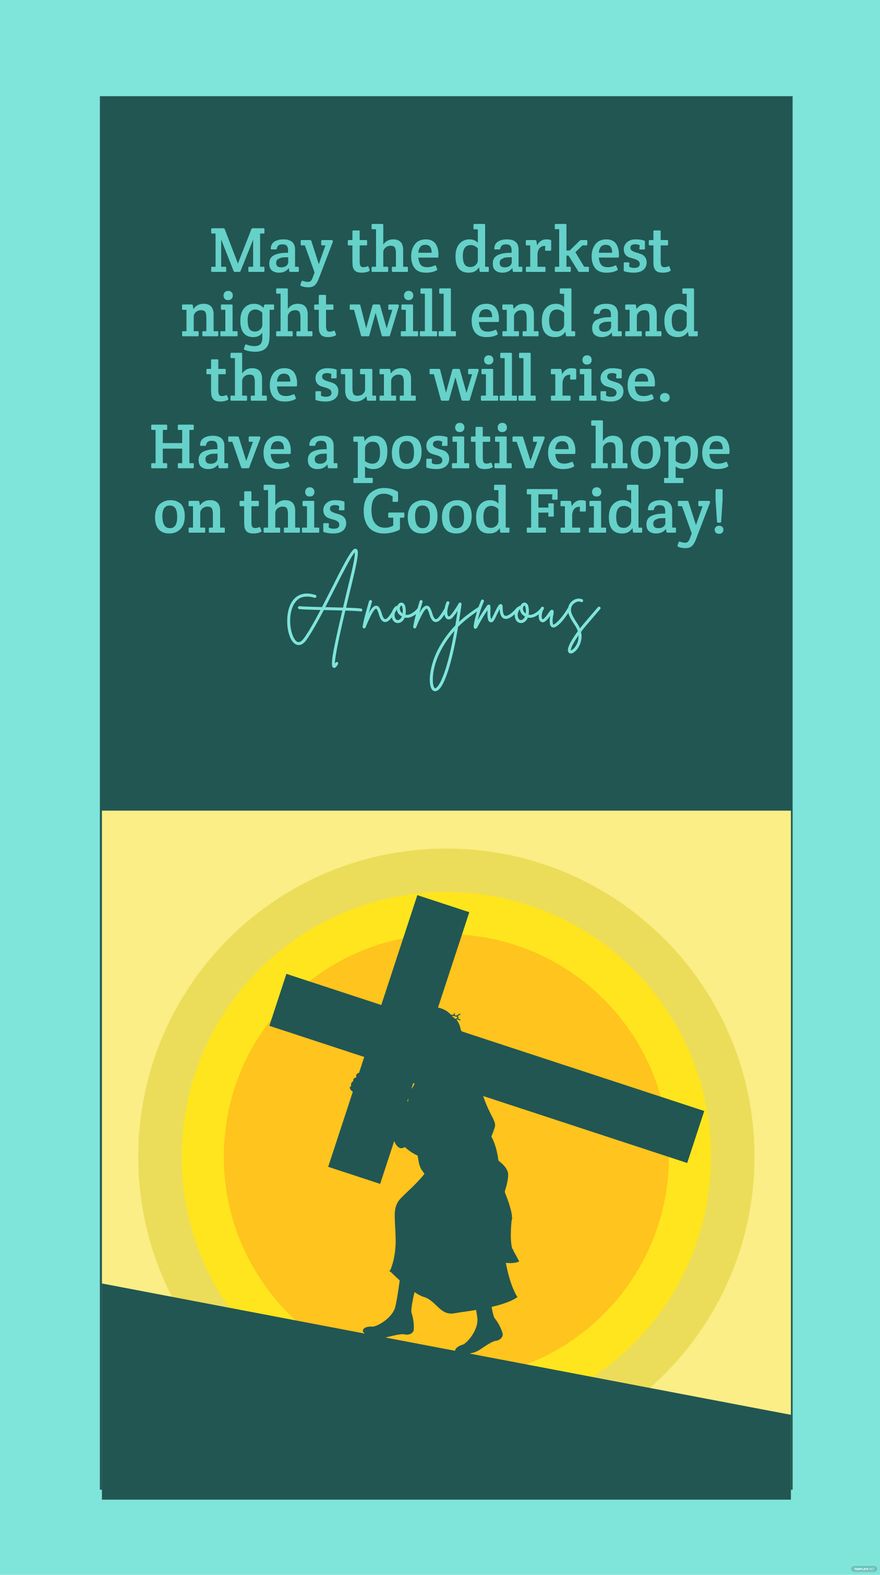 Free Anonymous - May the darkest night will end and the sun will rise. Have a positive hope on this Good Friday!